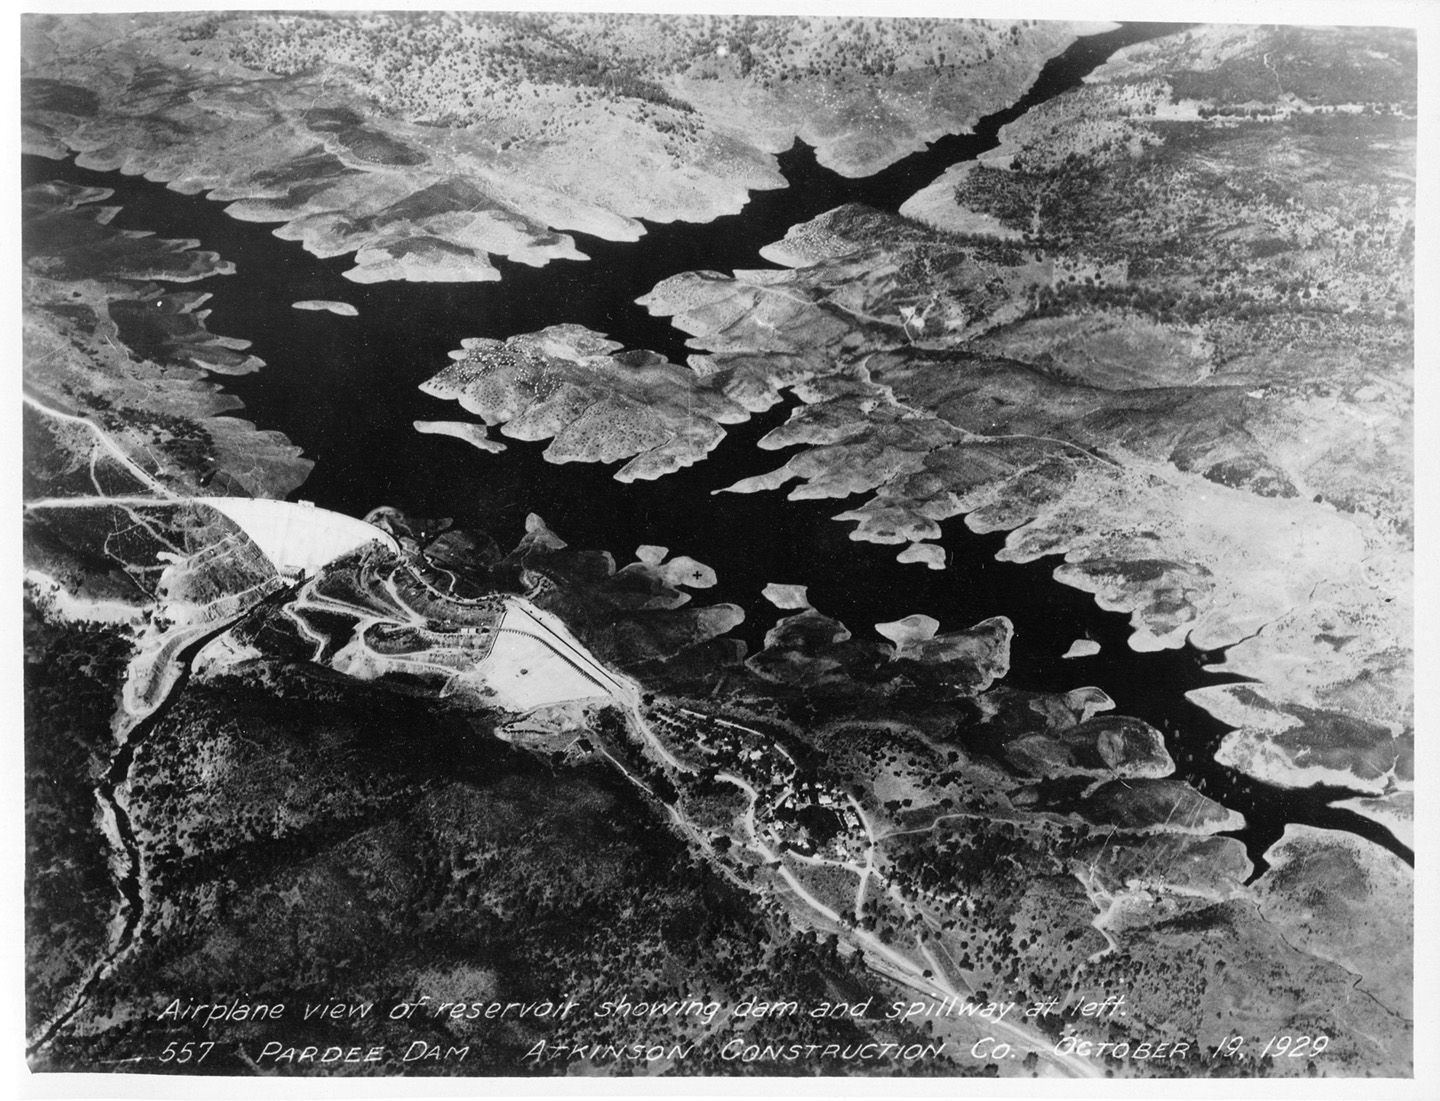 Downstream side of Pardee Dam from airplane. (October 1929)	